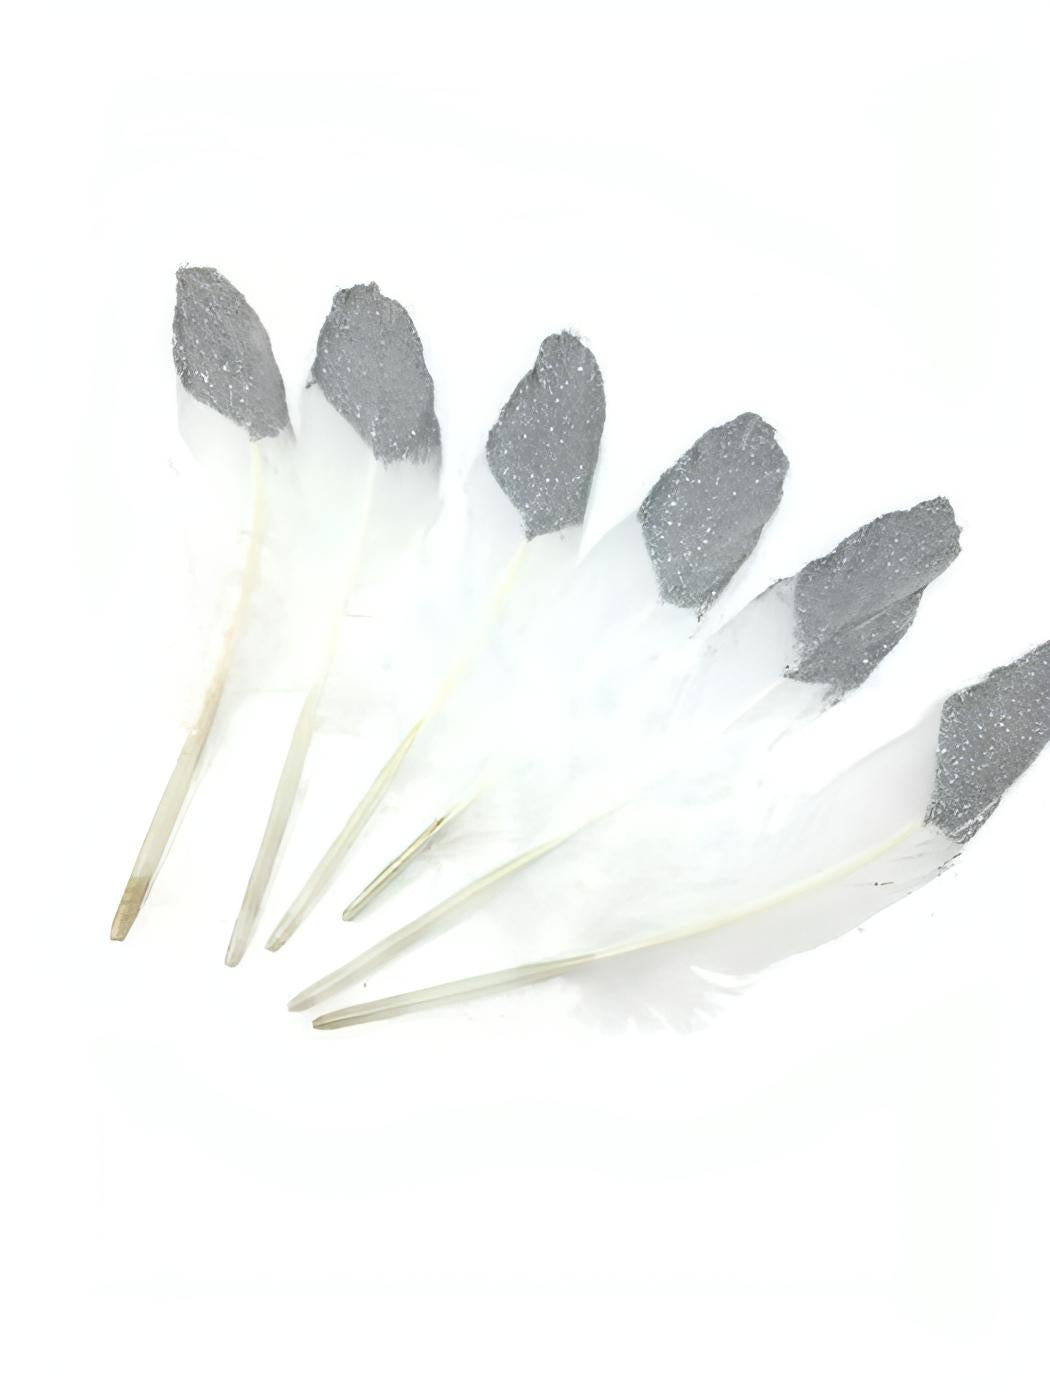 Half Silver Glitter-Dipped Feathers - 20cm (Pack of 6)